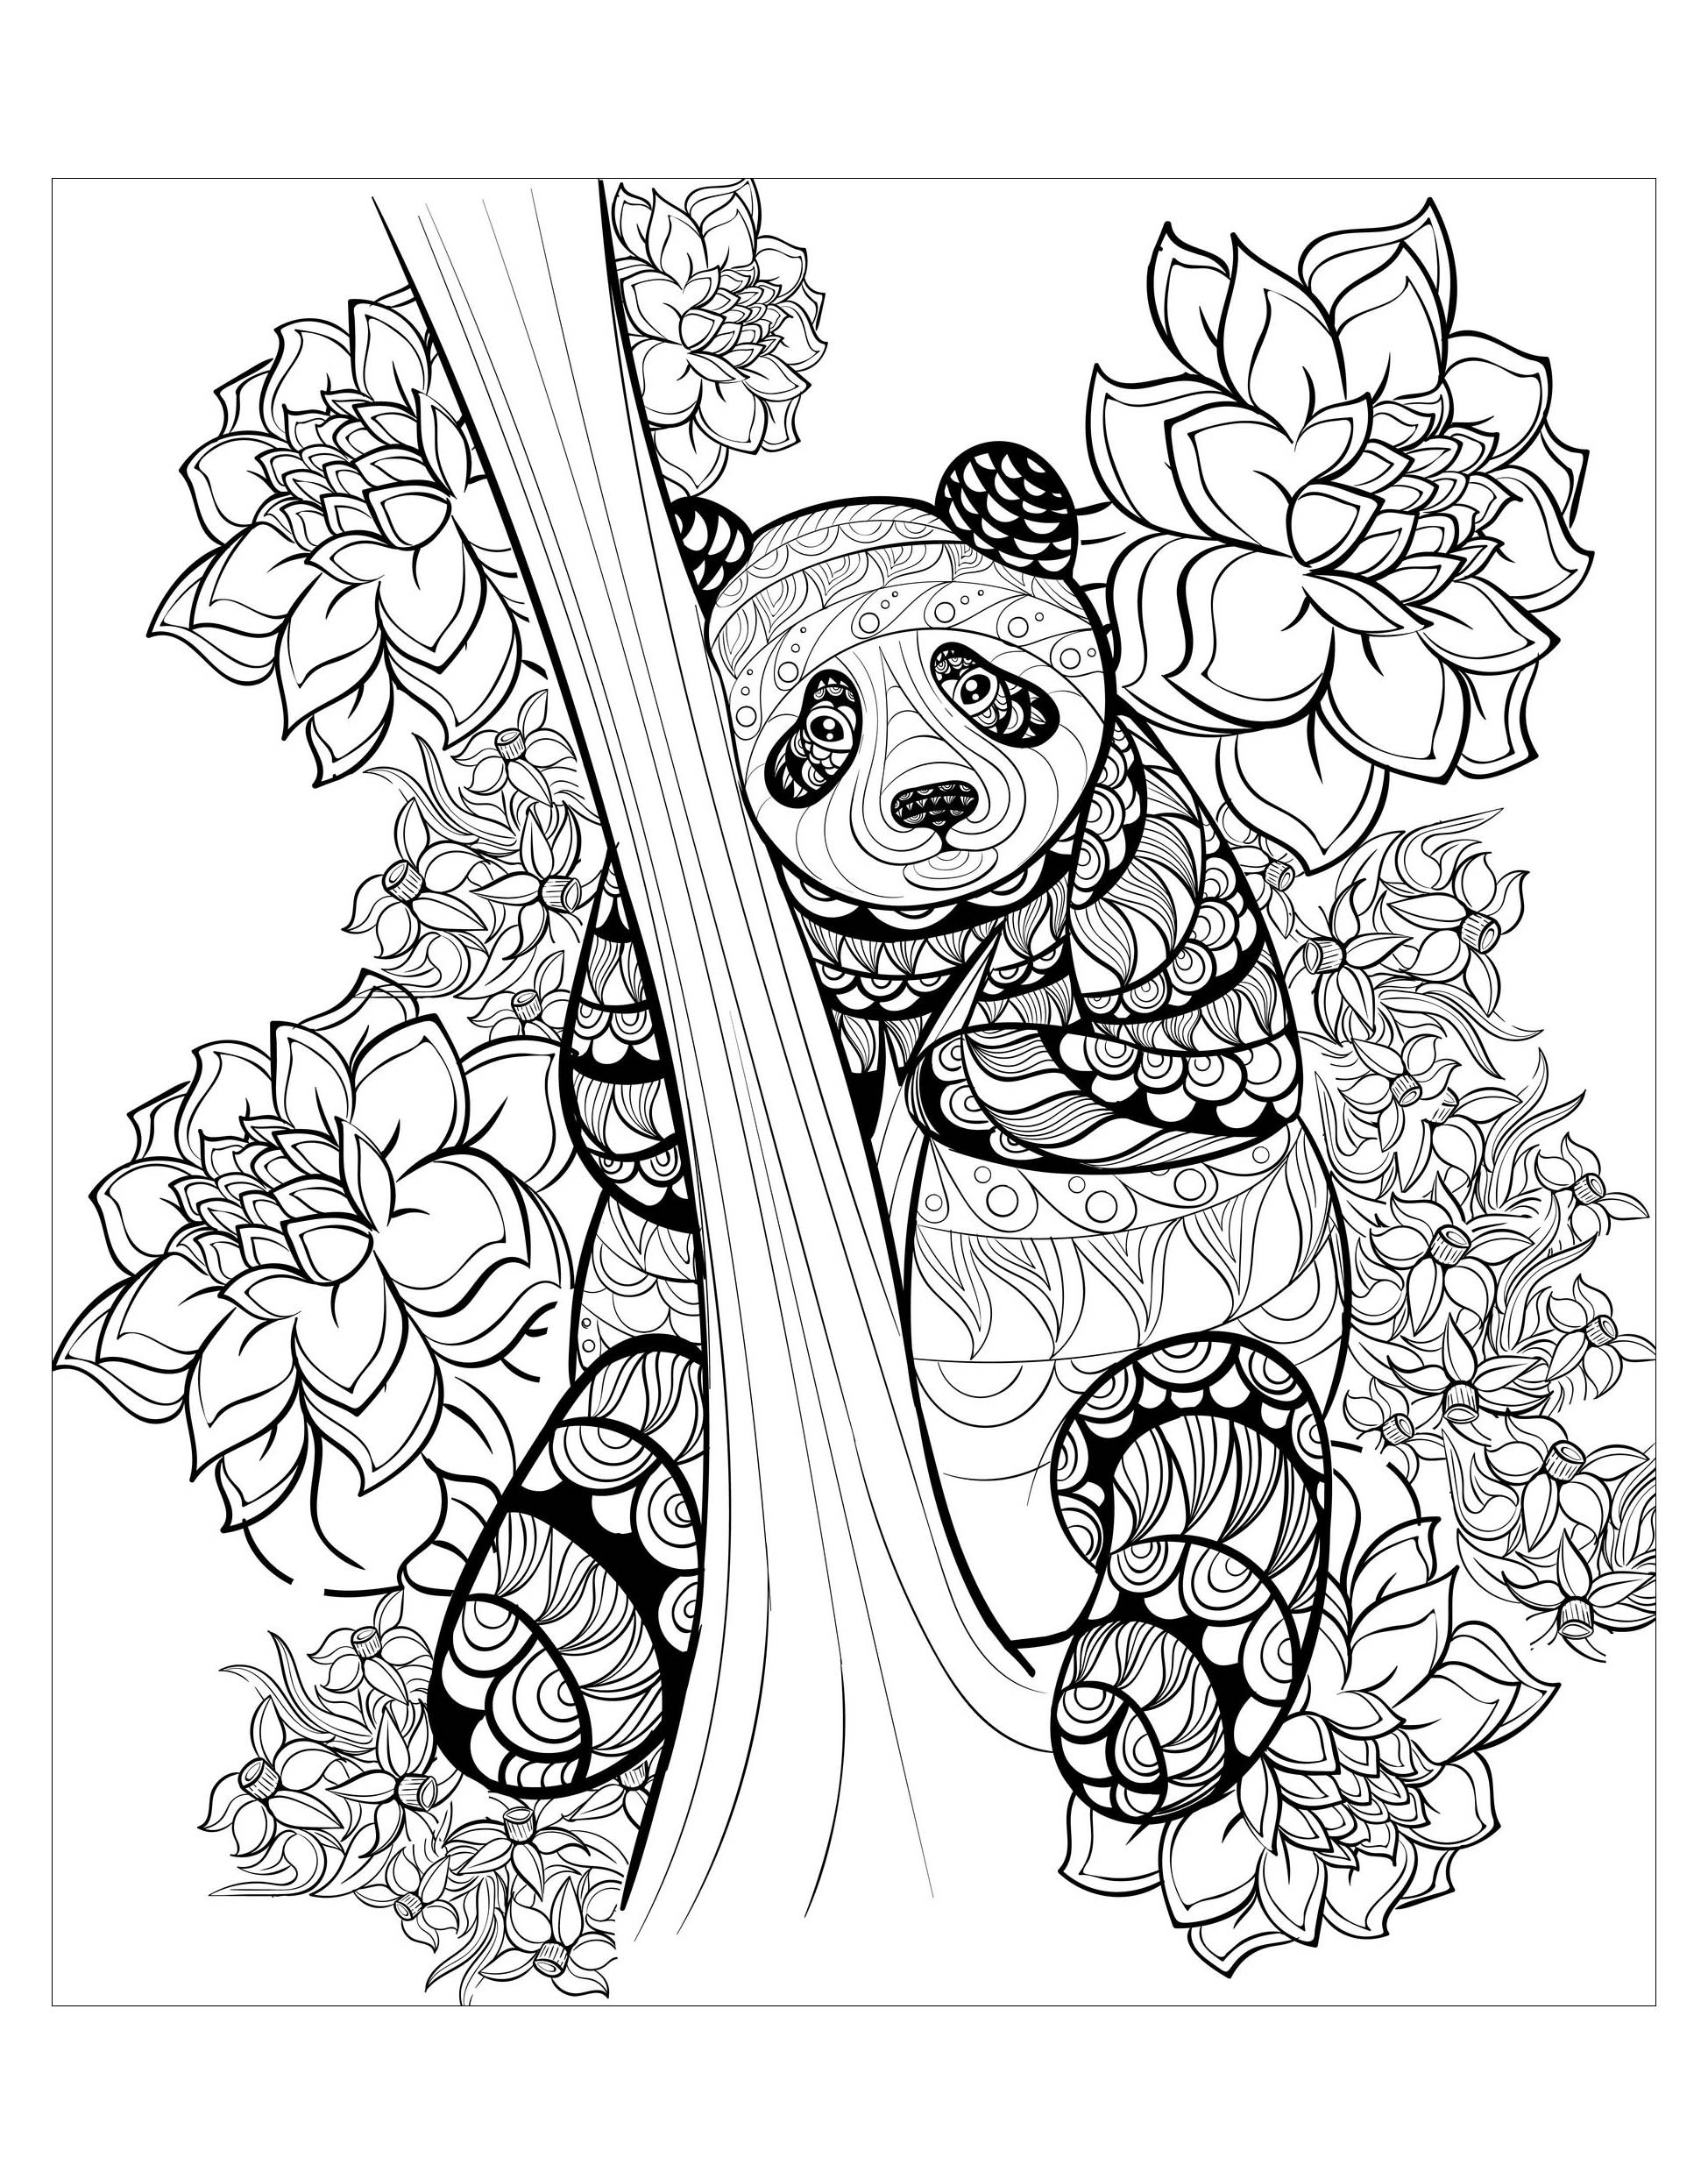 Panda Coloring Pages For Adults
 Panda by alfadanz P&a Adult Coloring Pages